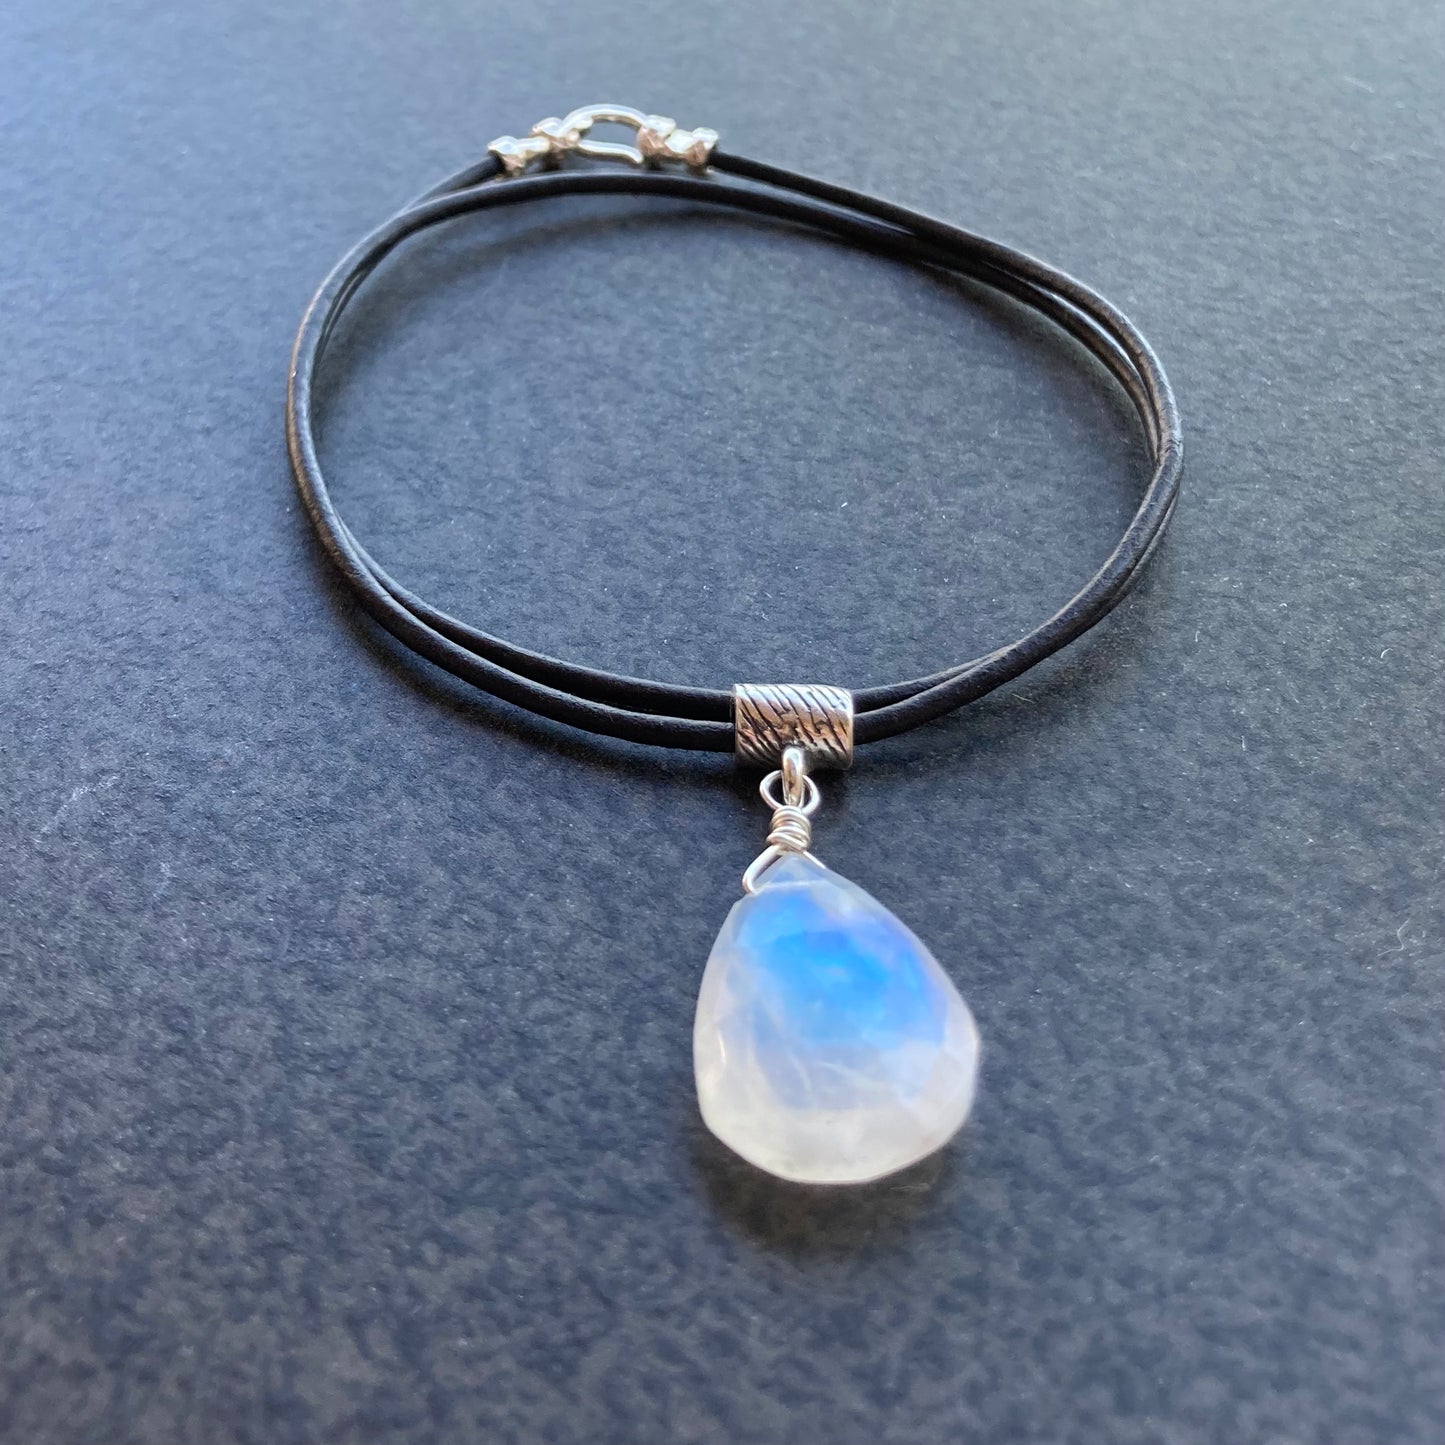 Rainbow Moonstone & Sterling Silver Leather Choker